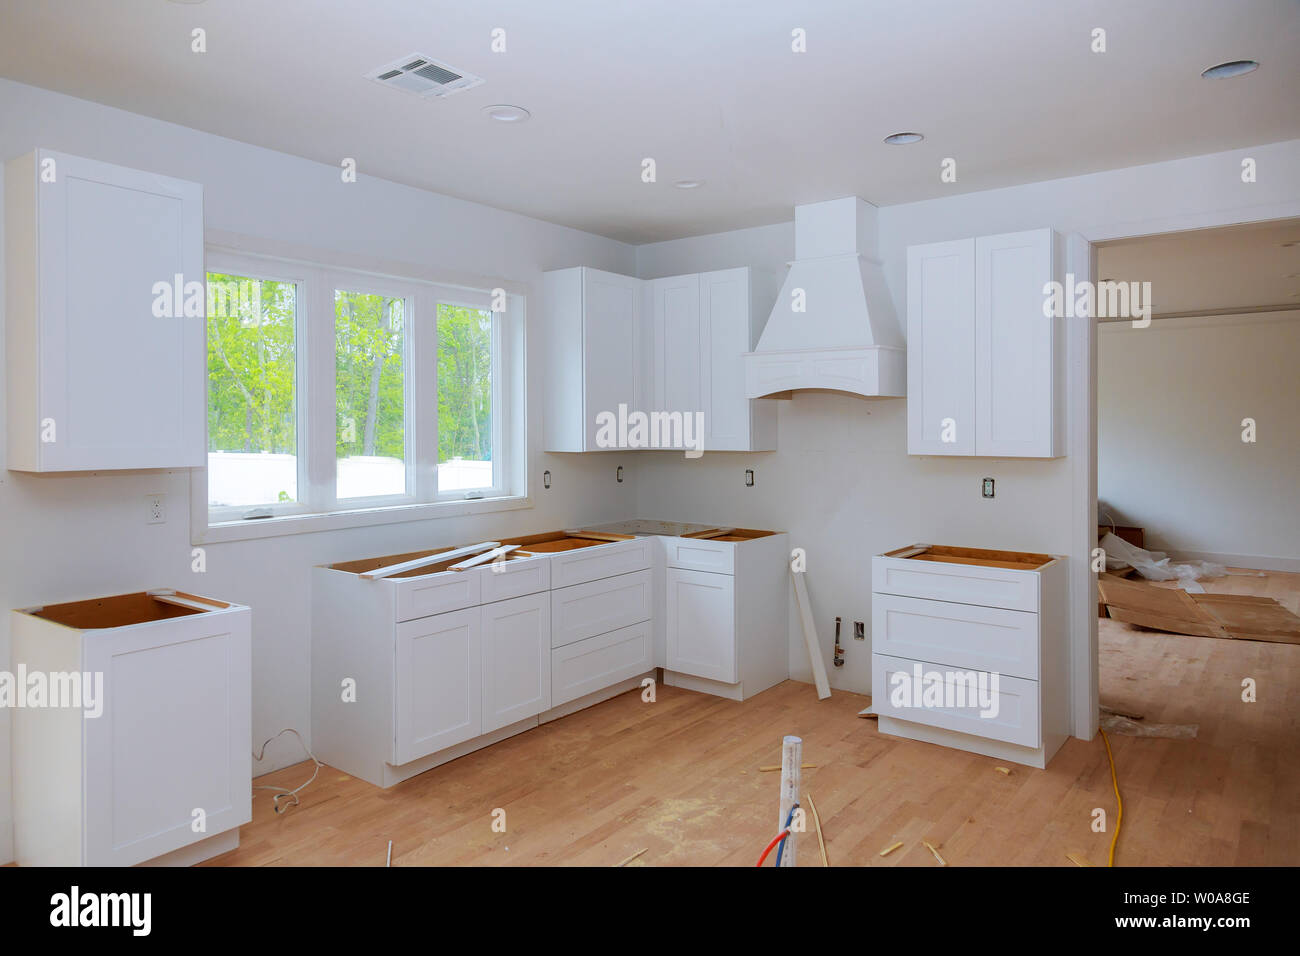 Interior design construction of kitchen with cabinet maker installing custom Stock Photo